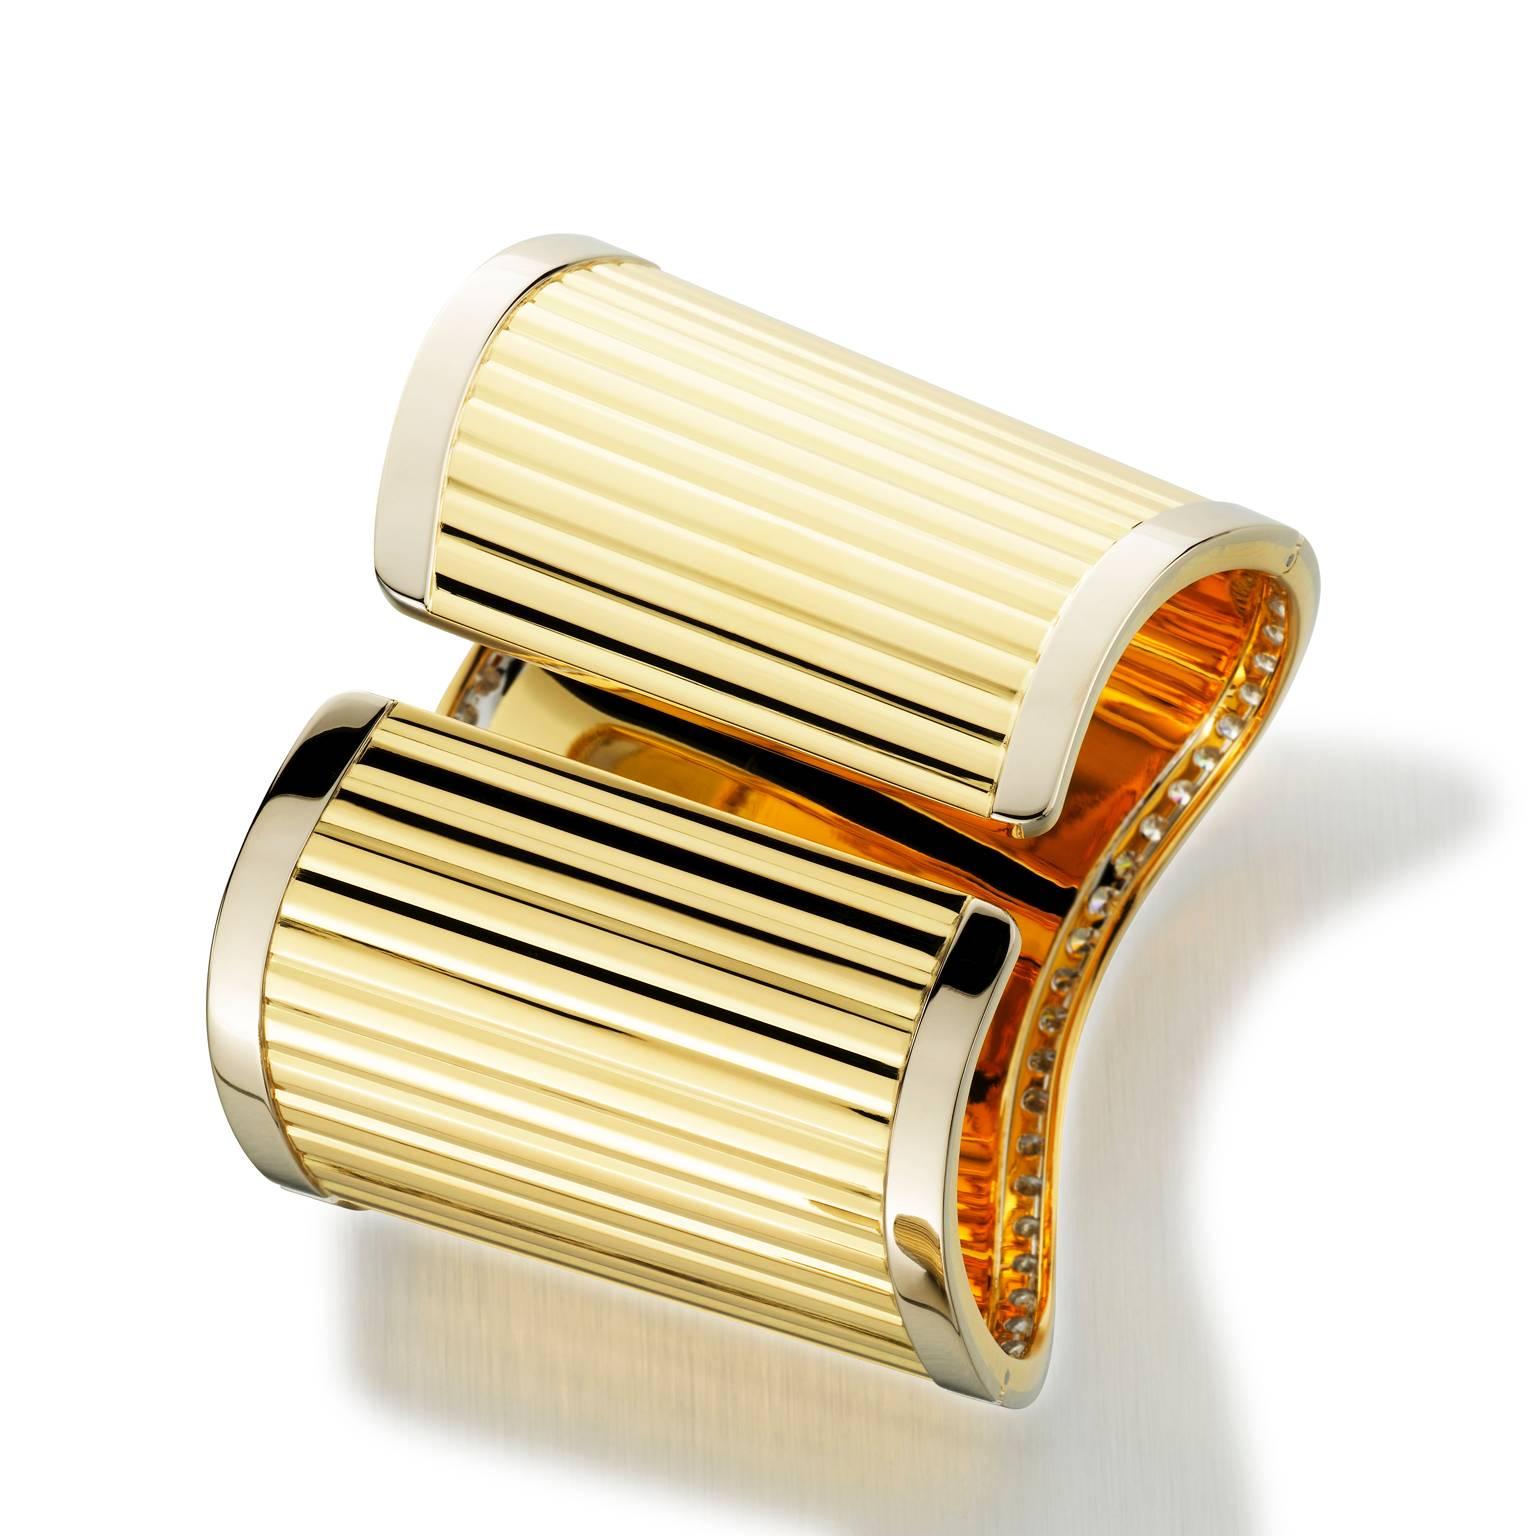 You will be red carpet ready wearing this outstanding Italian hand-fabricated 18k yellow gold cuff bracelet. Bracelet is double spring hinged, featuring a ribbed mirrored finish accented with 7.17 Cttw VS F-G diamonds and a smooth mirrored finish on